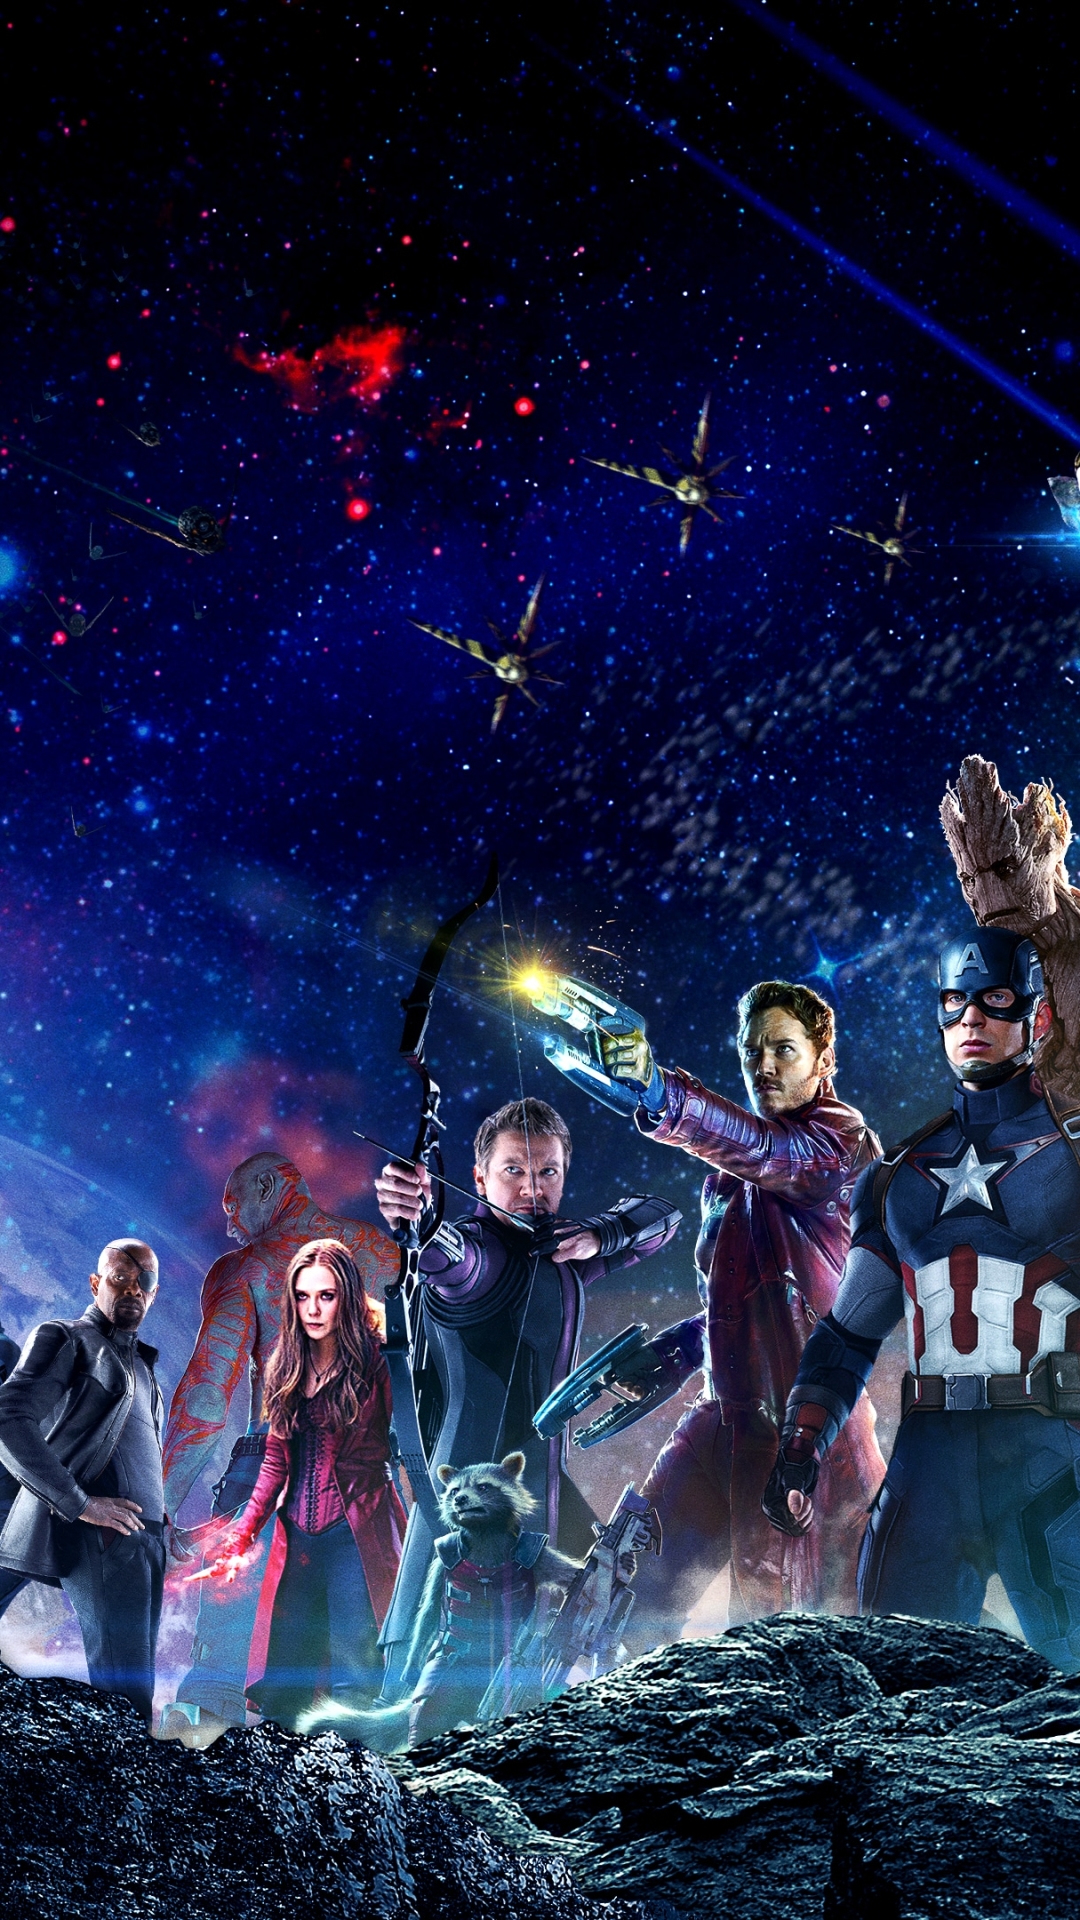 Download mobile wallpaper Captain America, Avengers, Movie, Hawkeye, Nick Fury, The Avengers, Rocket Raccoon, Star Lord, Drax The Destroyer, Groot, Peter Quill, Avengers: Infinity War for free.